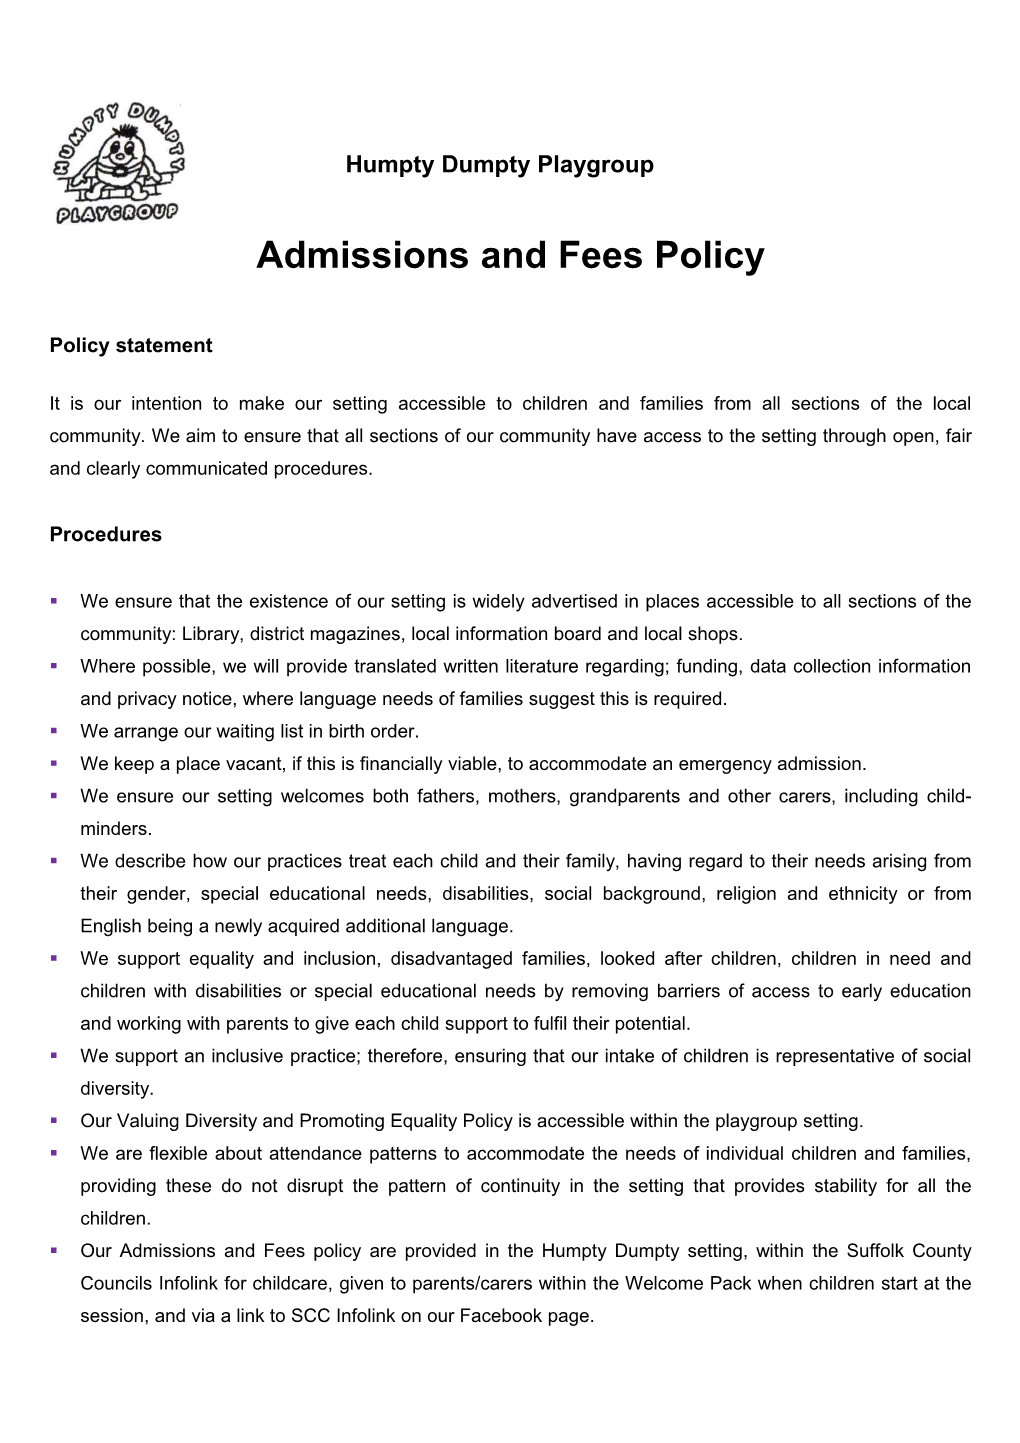 Admissions and Fees Policy